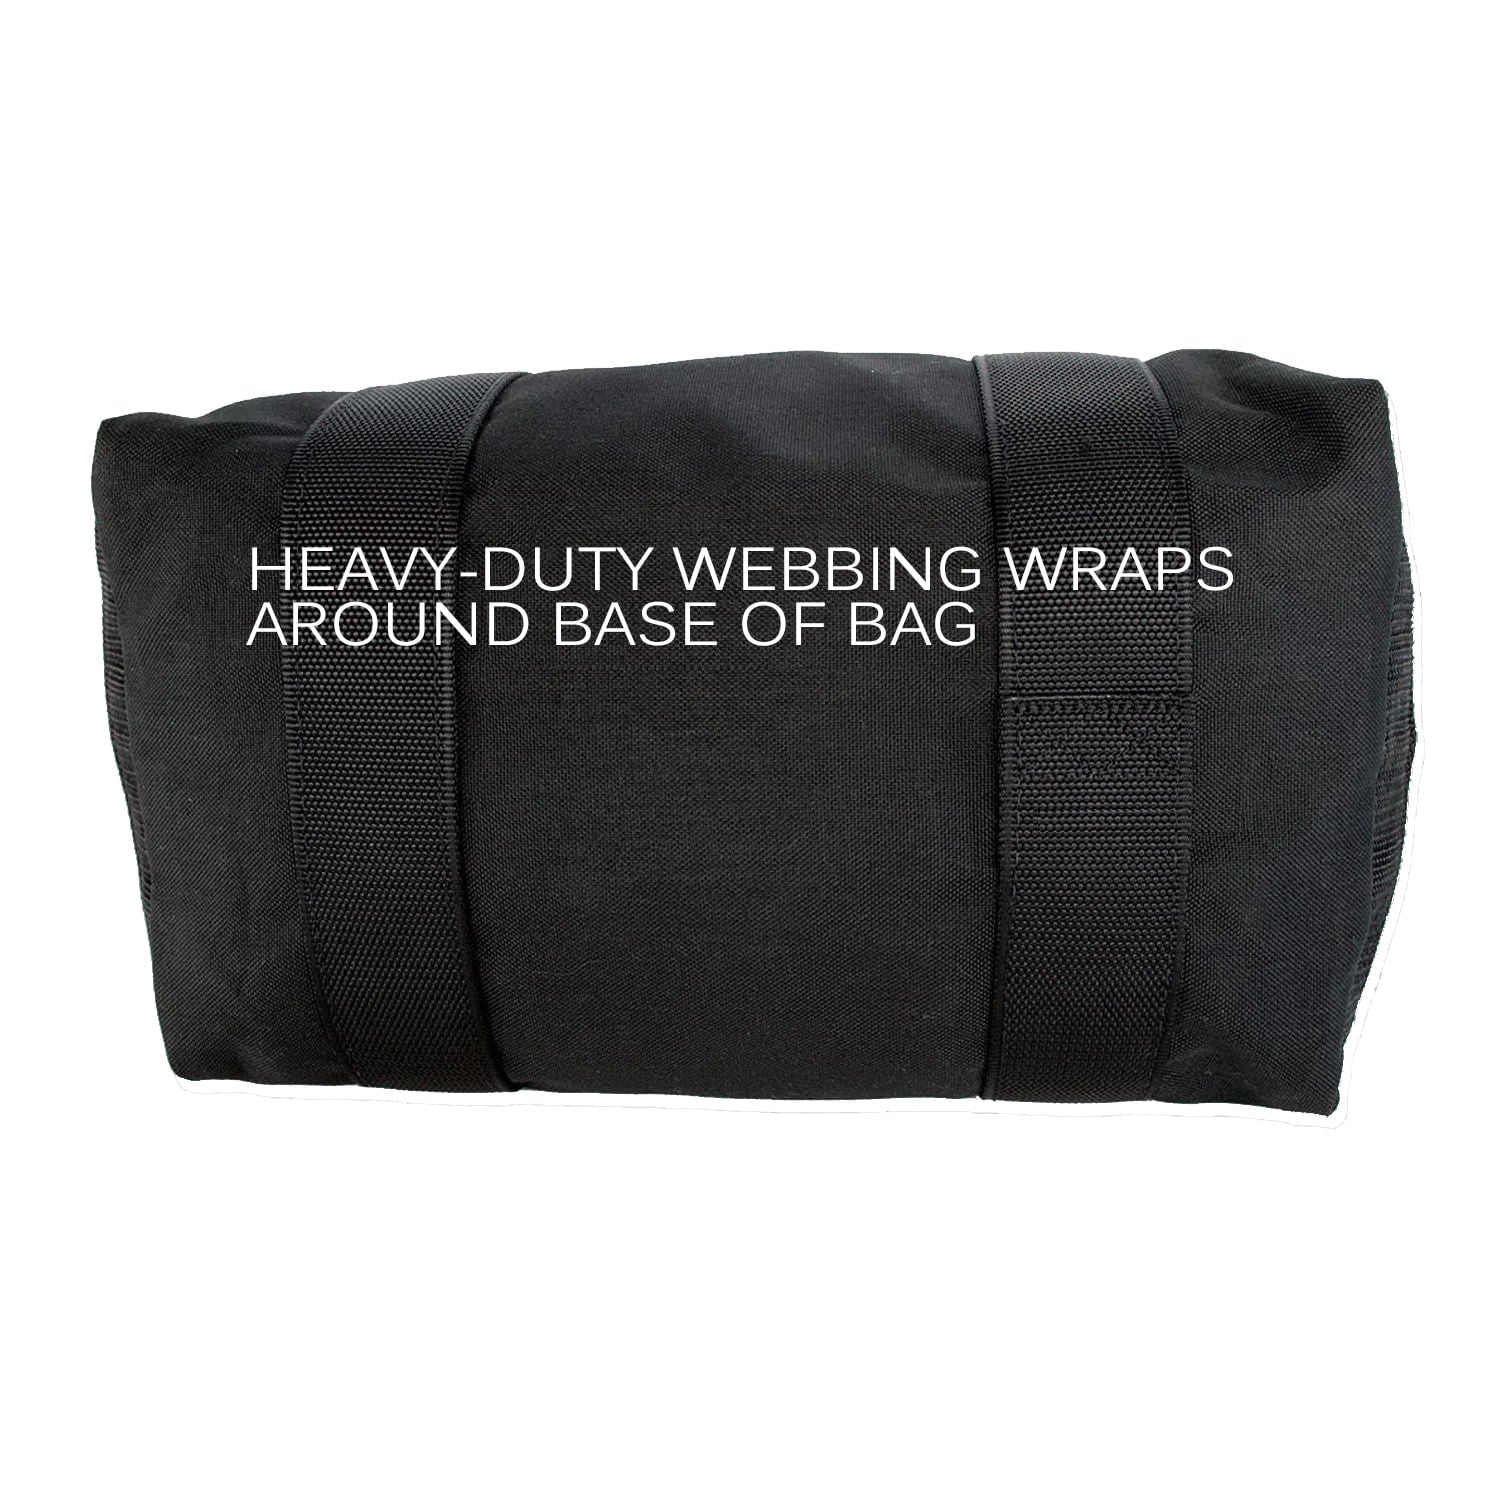 Heavy duty webbing wraps around the base of bag.  Note double box X stitching pattern for reinforcement. 